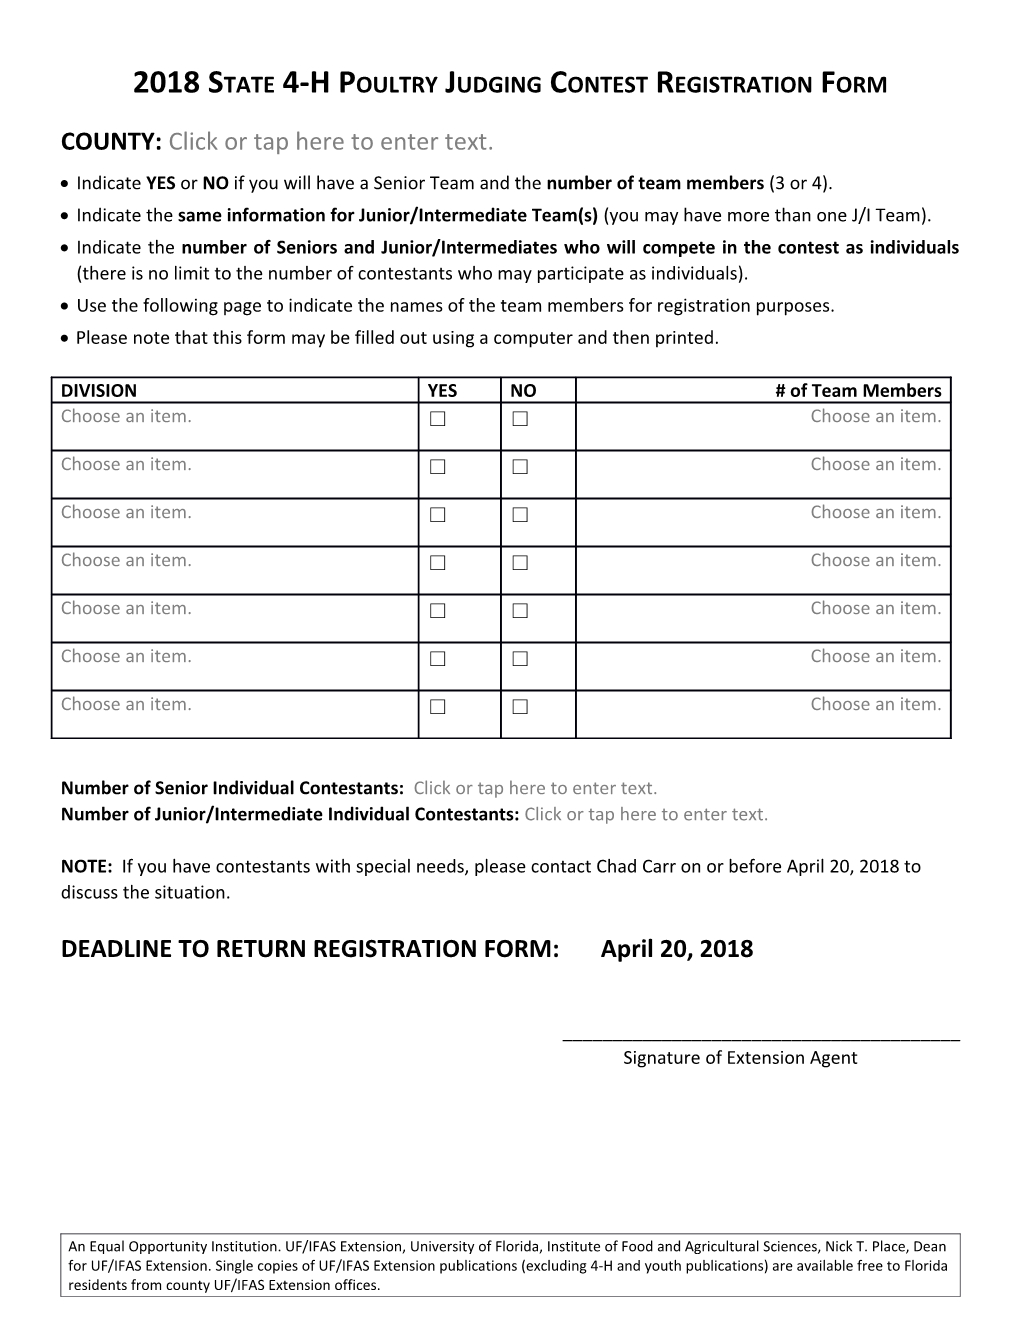 2018 State 4-H Poultry Judging Contest Registration Form